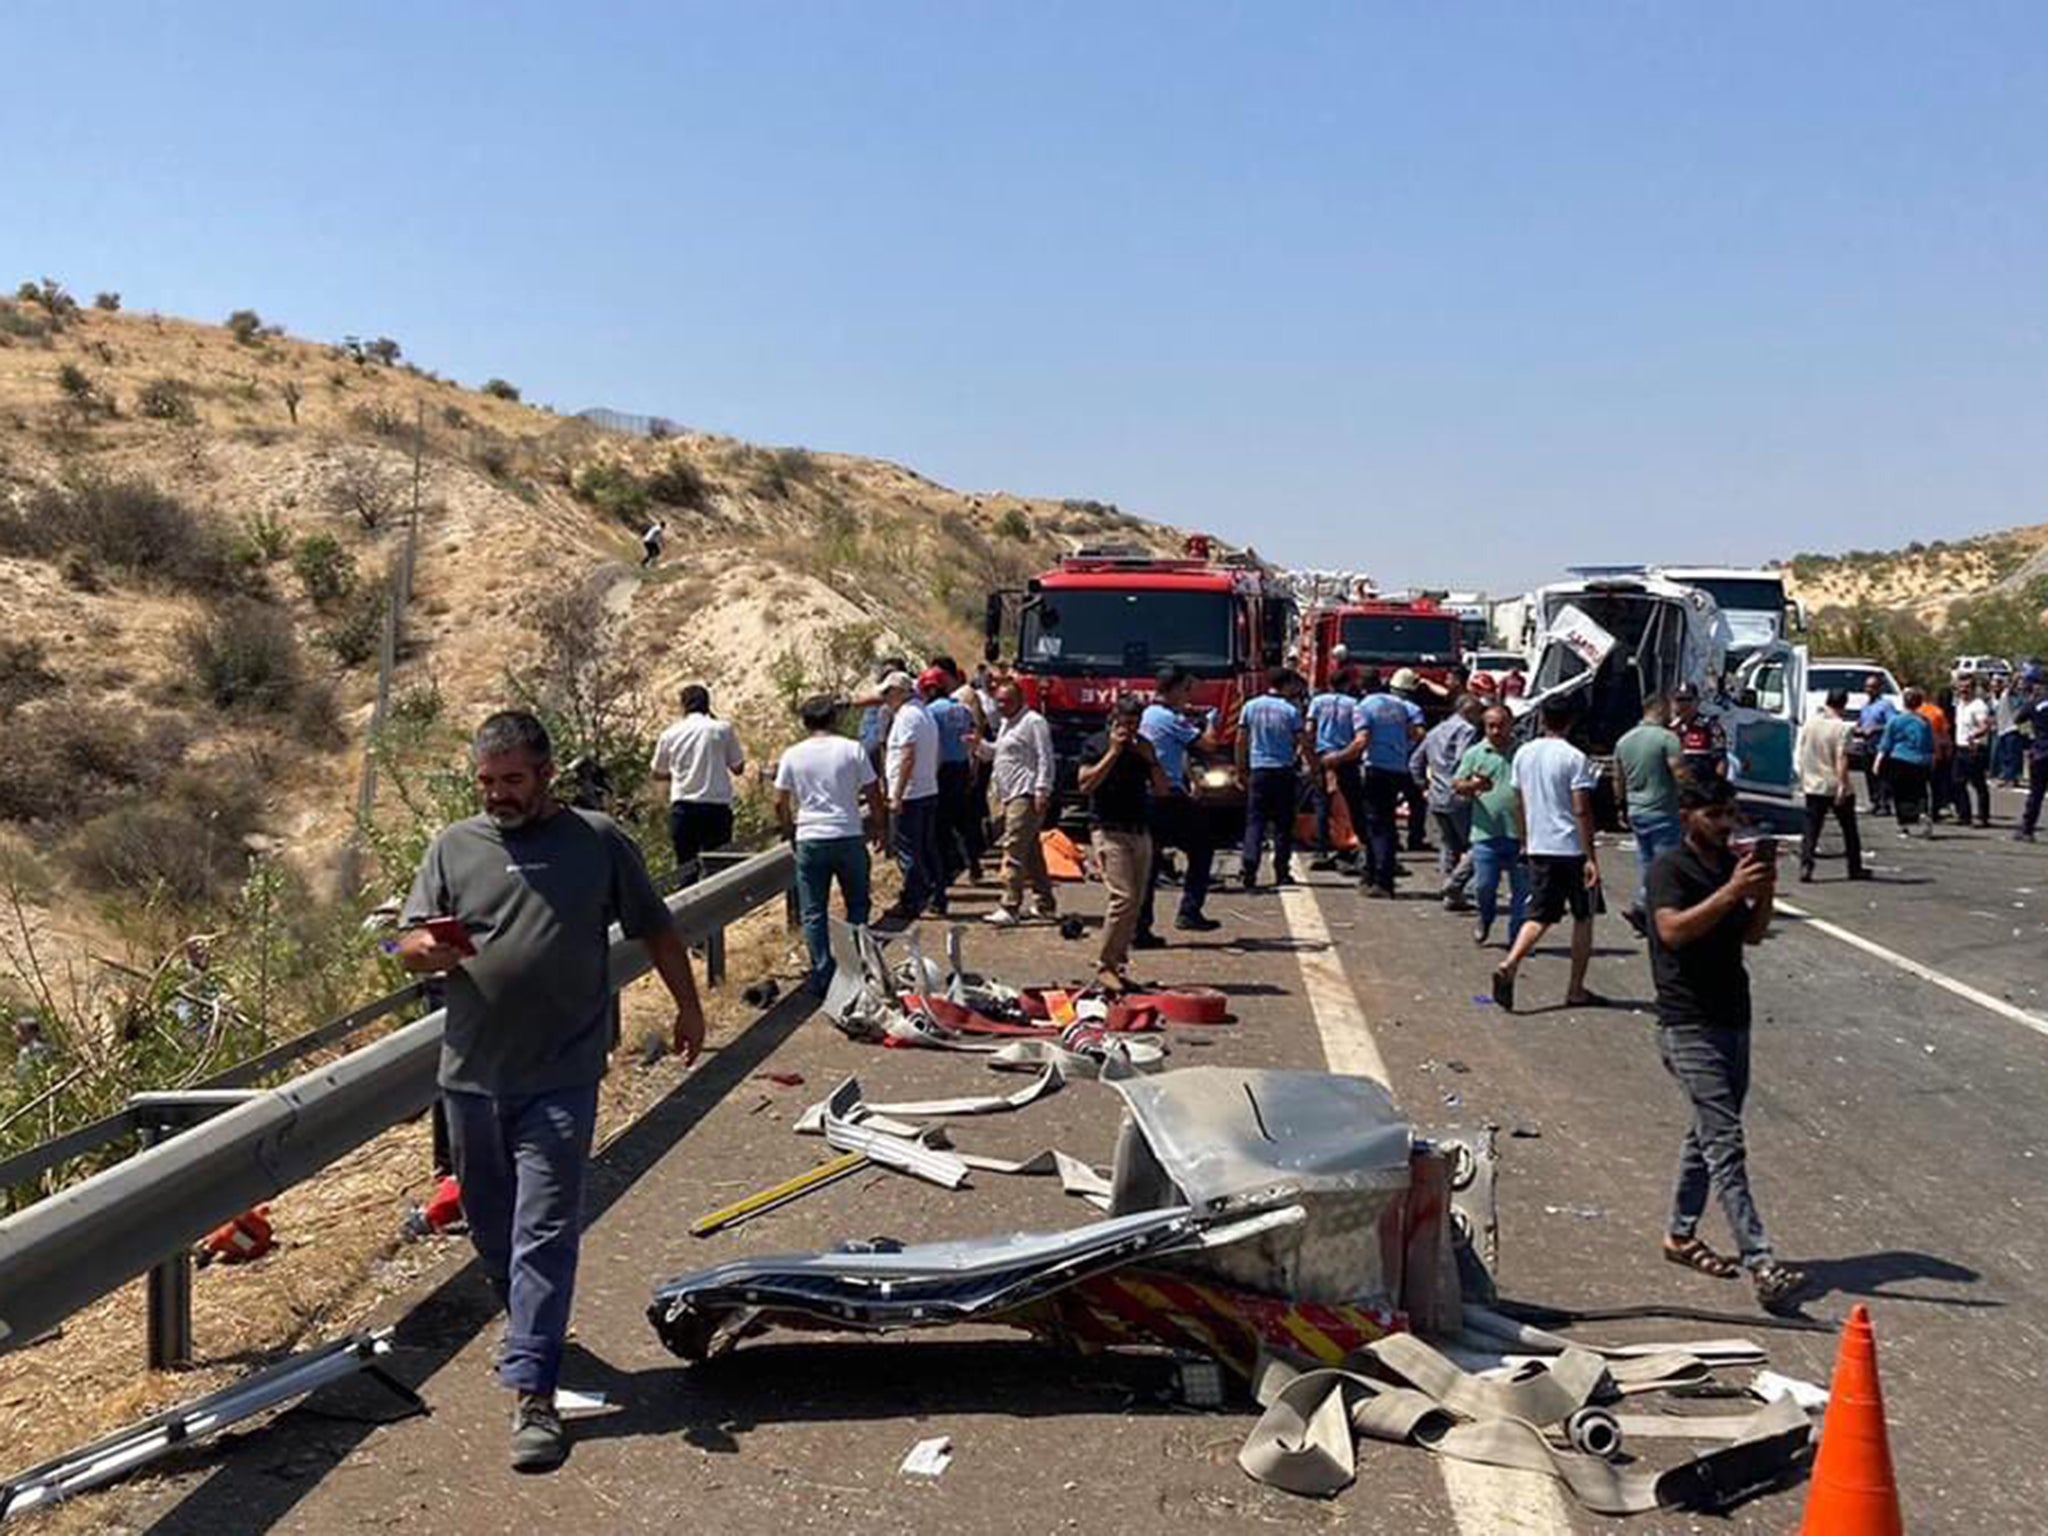 The scene of the crash, between Gaziantep and Nizip, close to Turkey’s border with Syria, where a bus careered into emergency services vehicles